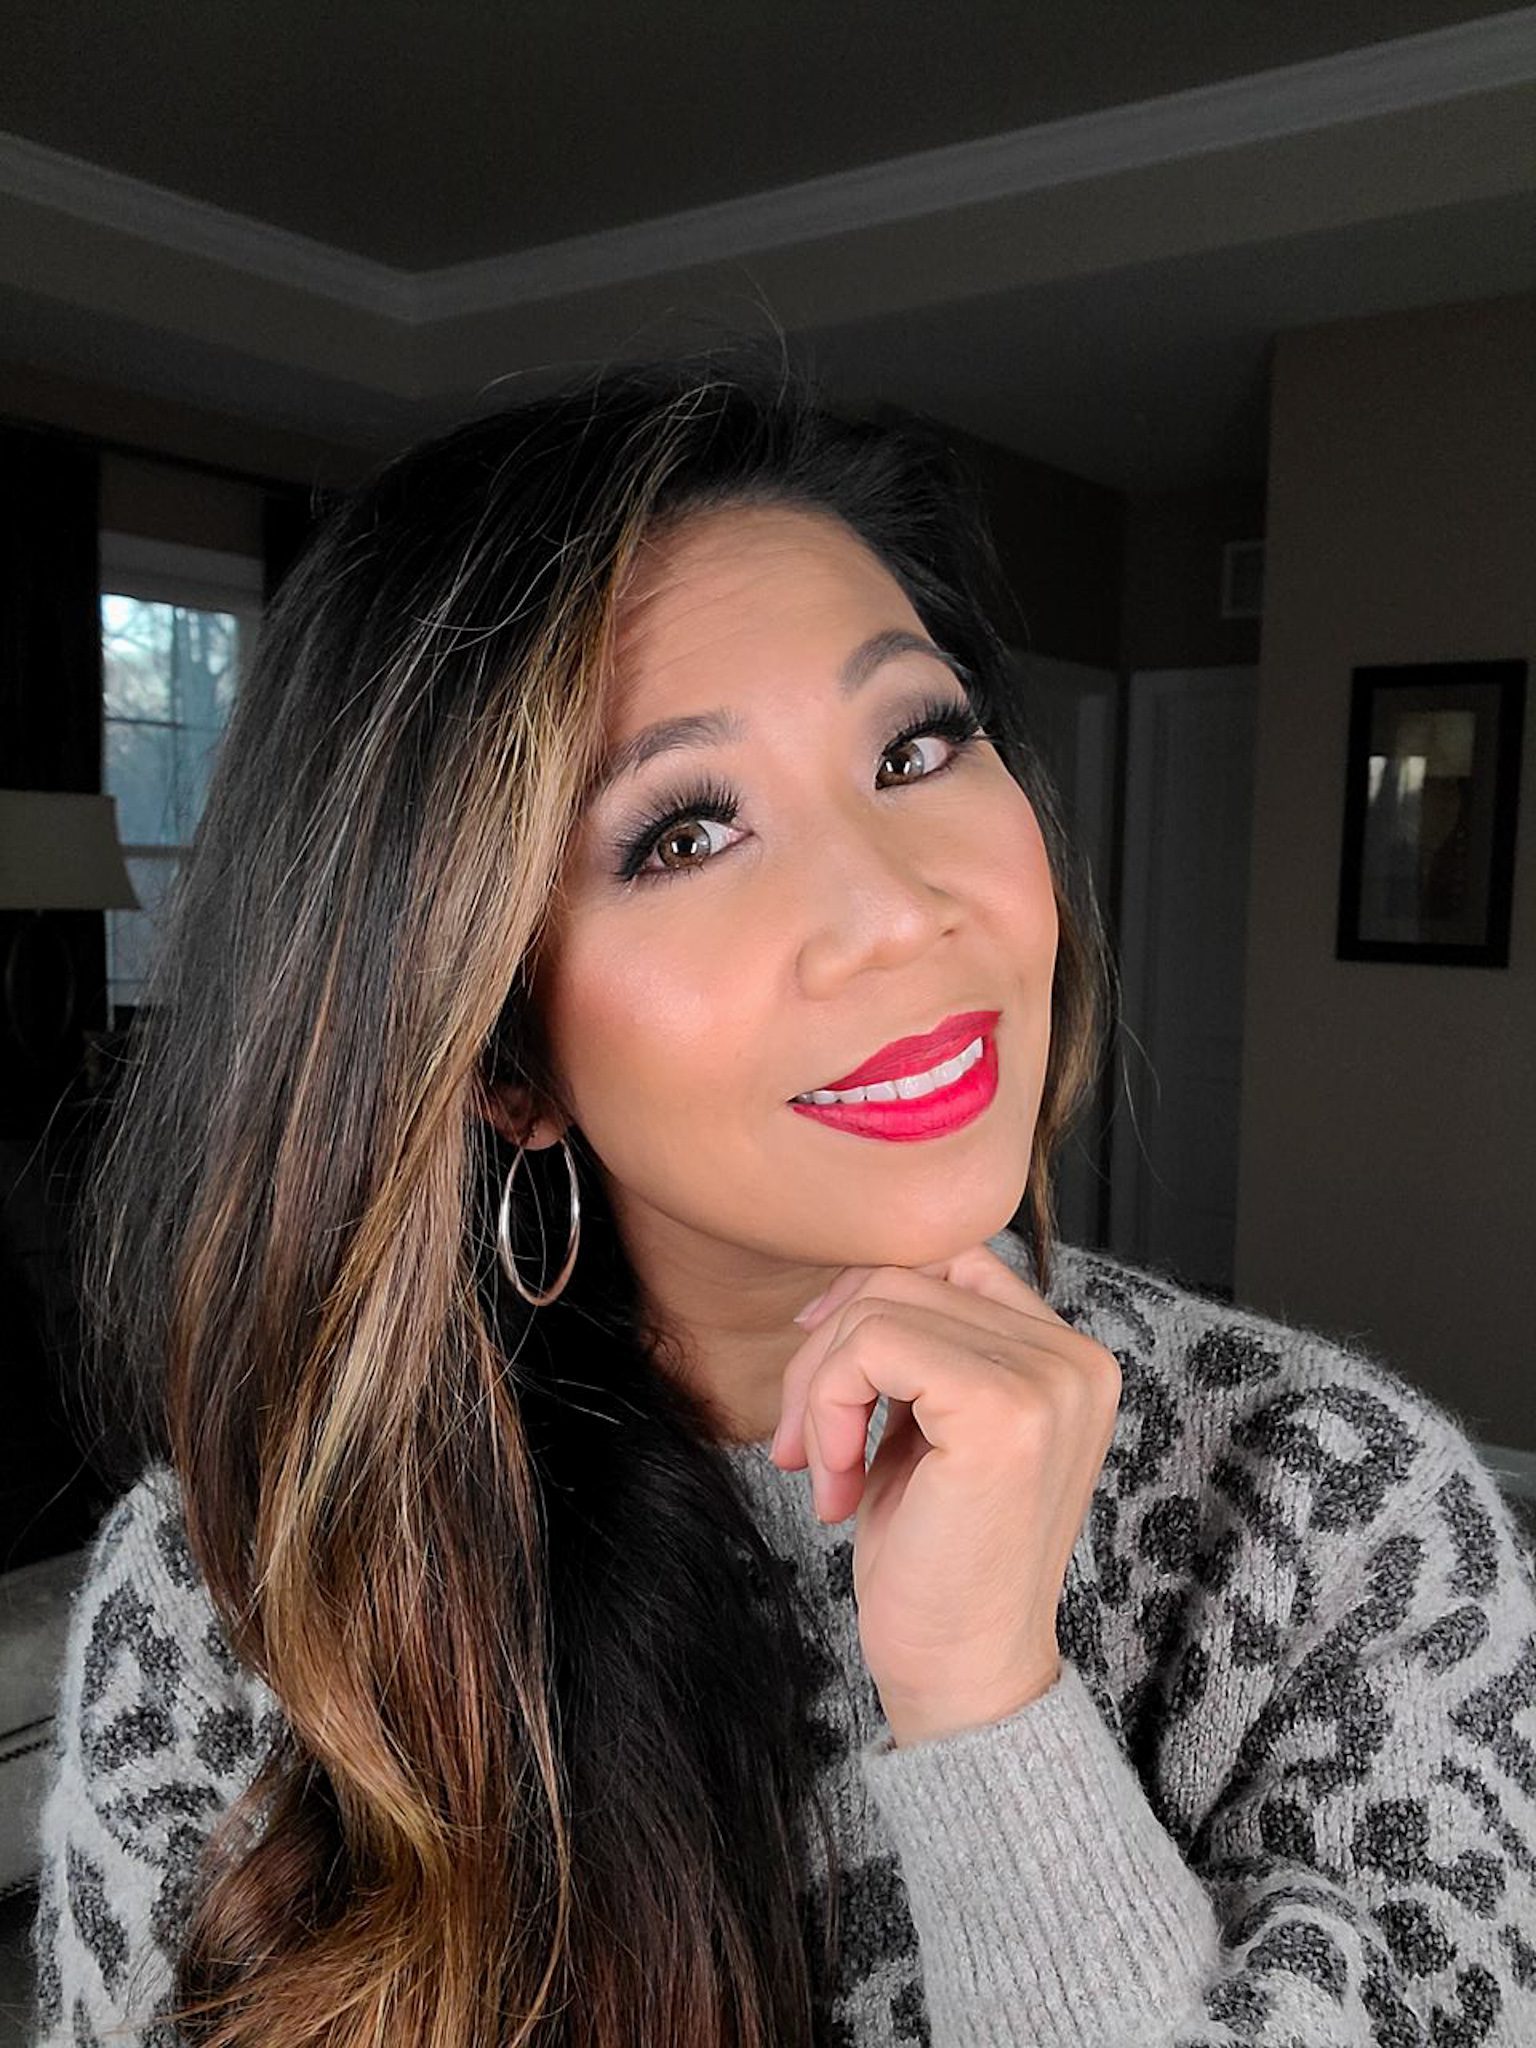 woman smiling with her head slightly tilted to one side and her hand on her chin. she's wearing a gray sweater, smoky gray eyeshadow, and red lipstick.